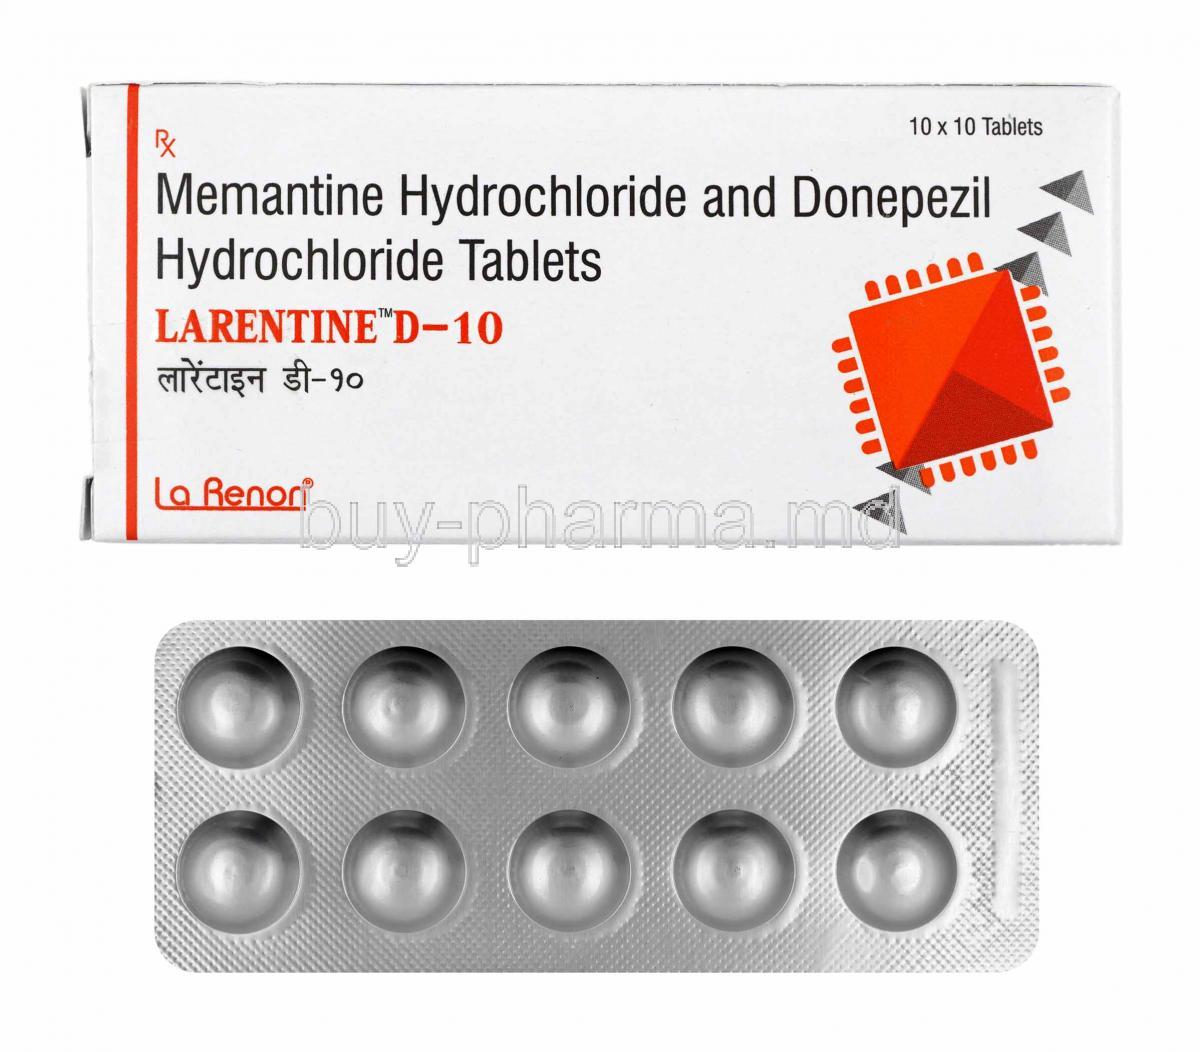 Larentine-D, Donepezil and Memantine 10mg box and tablets